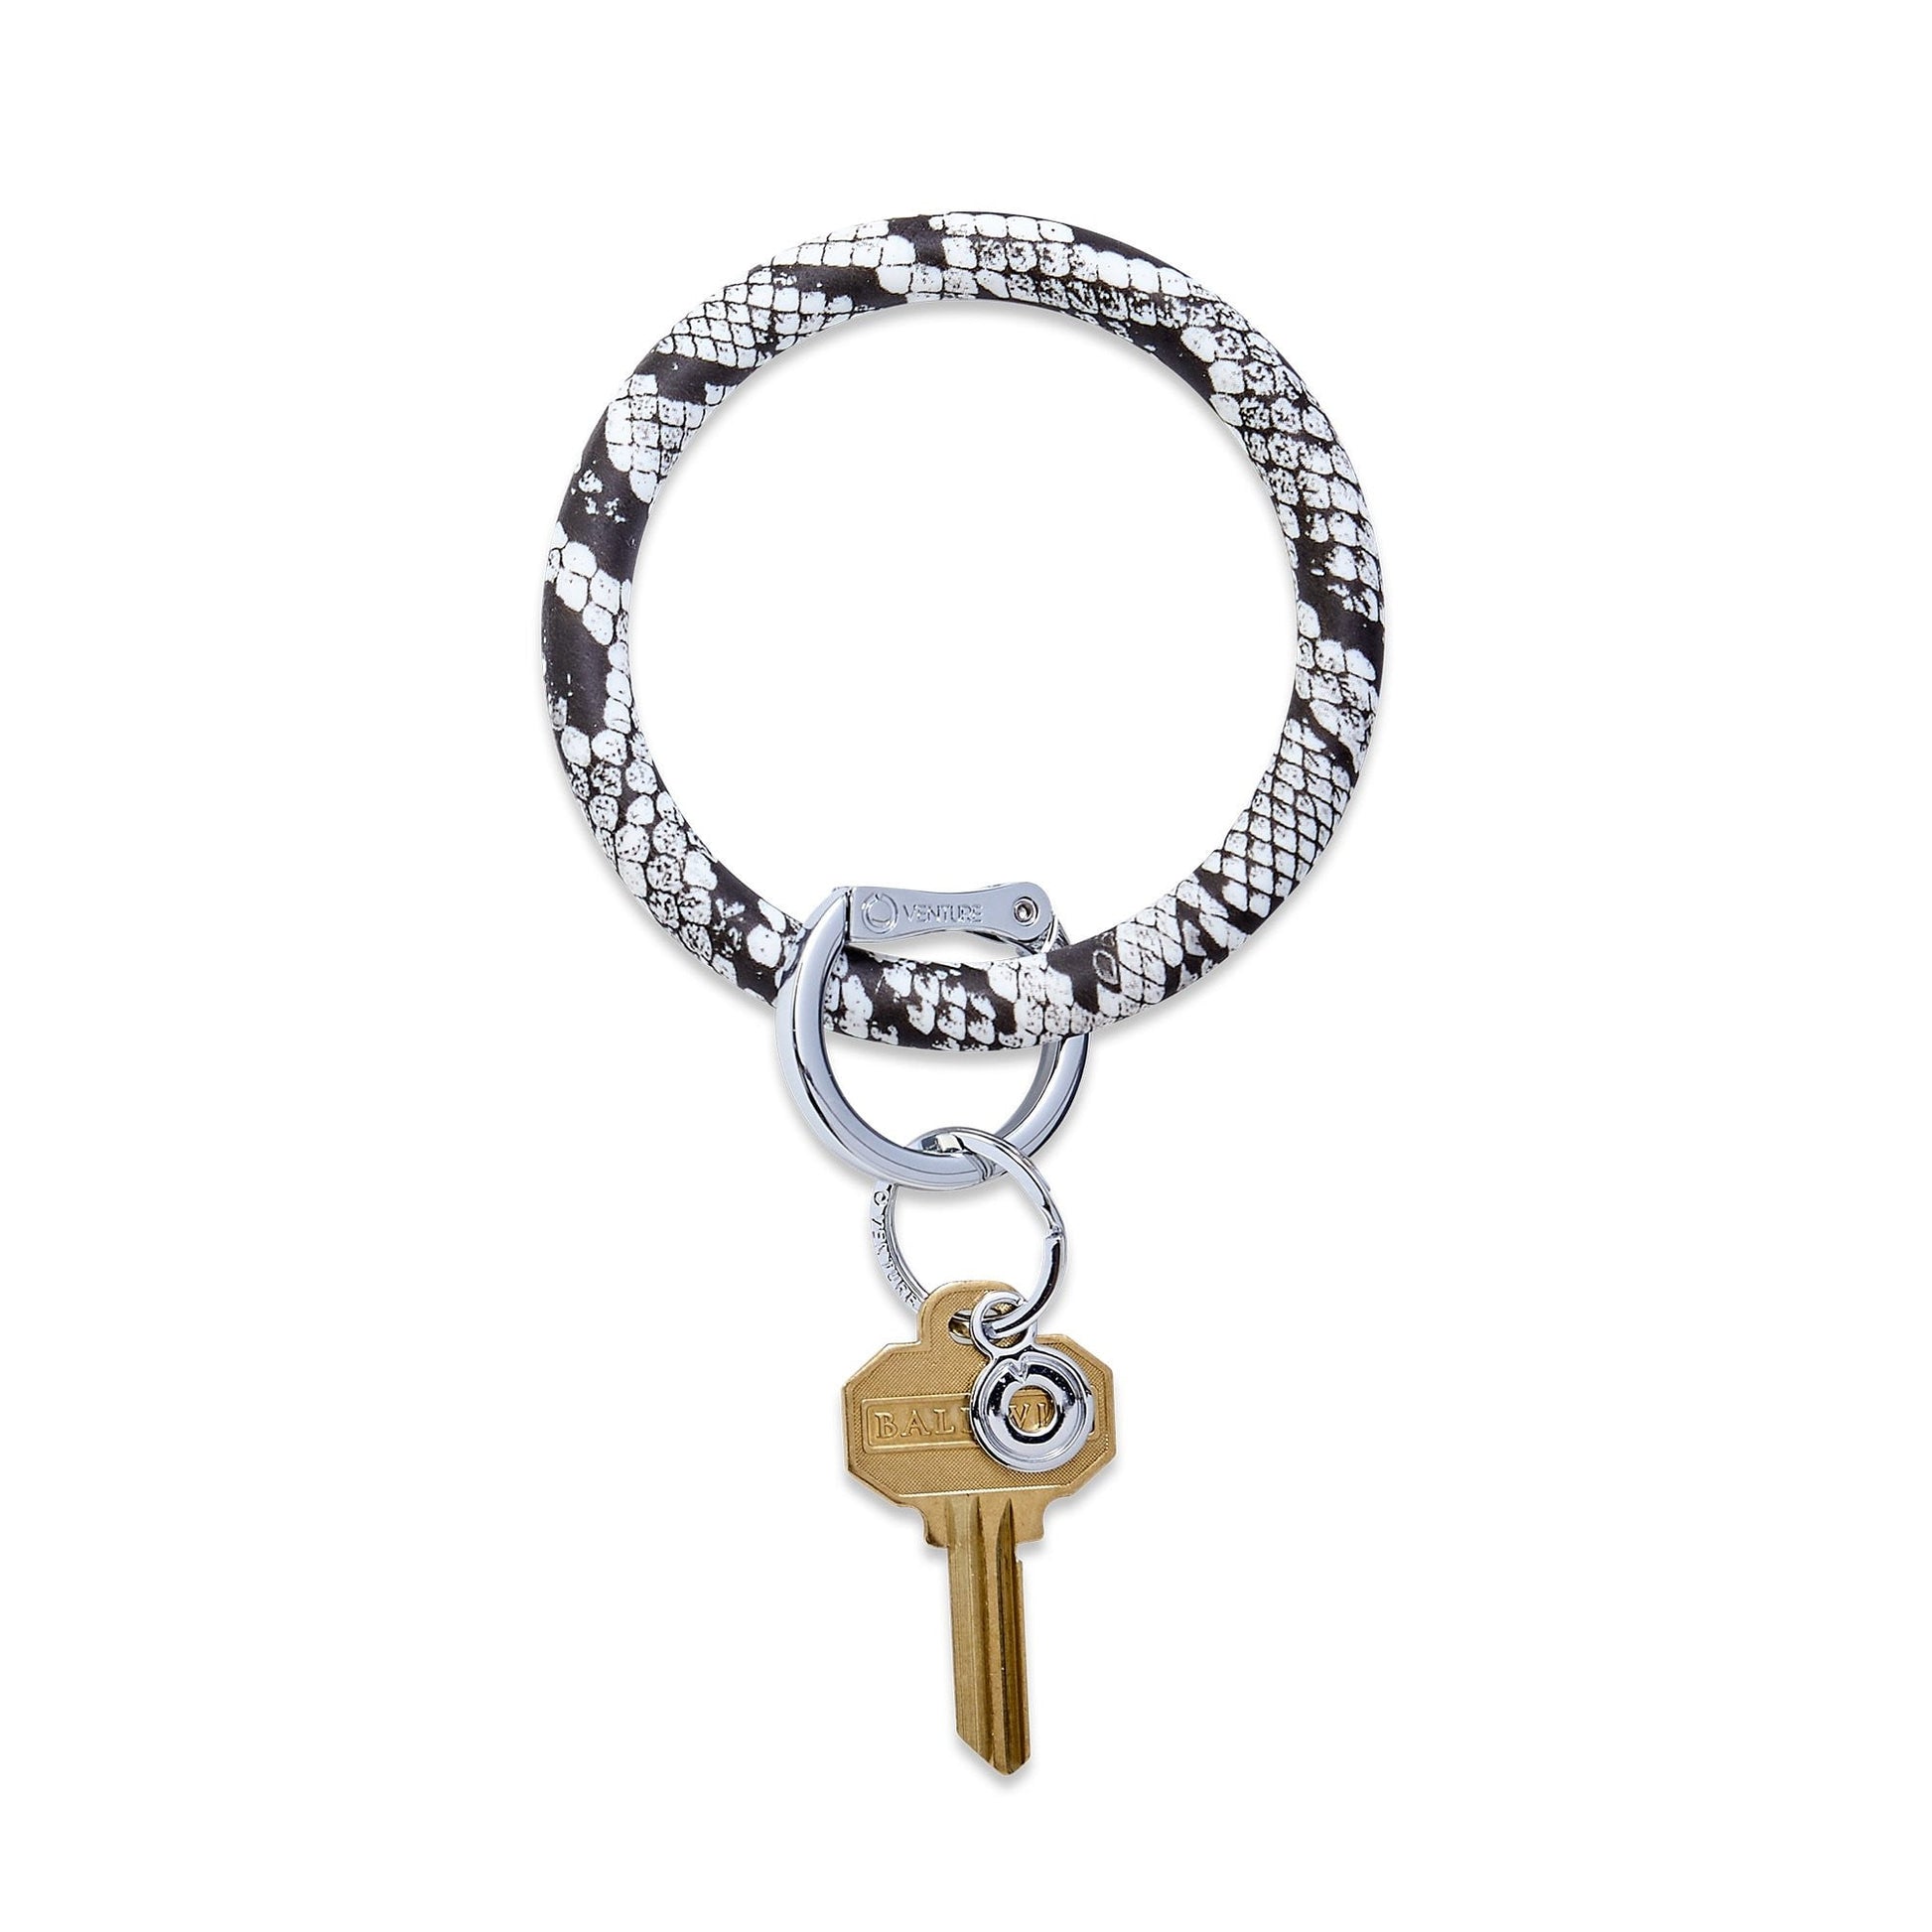 Black and white snakeskin print silicone big O key ring with silver locking clasp